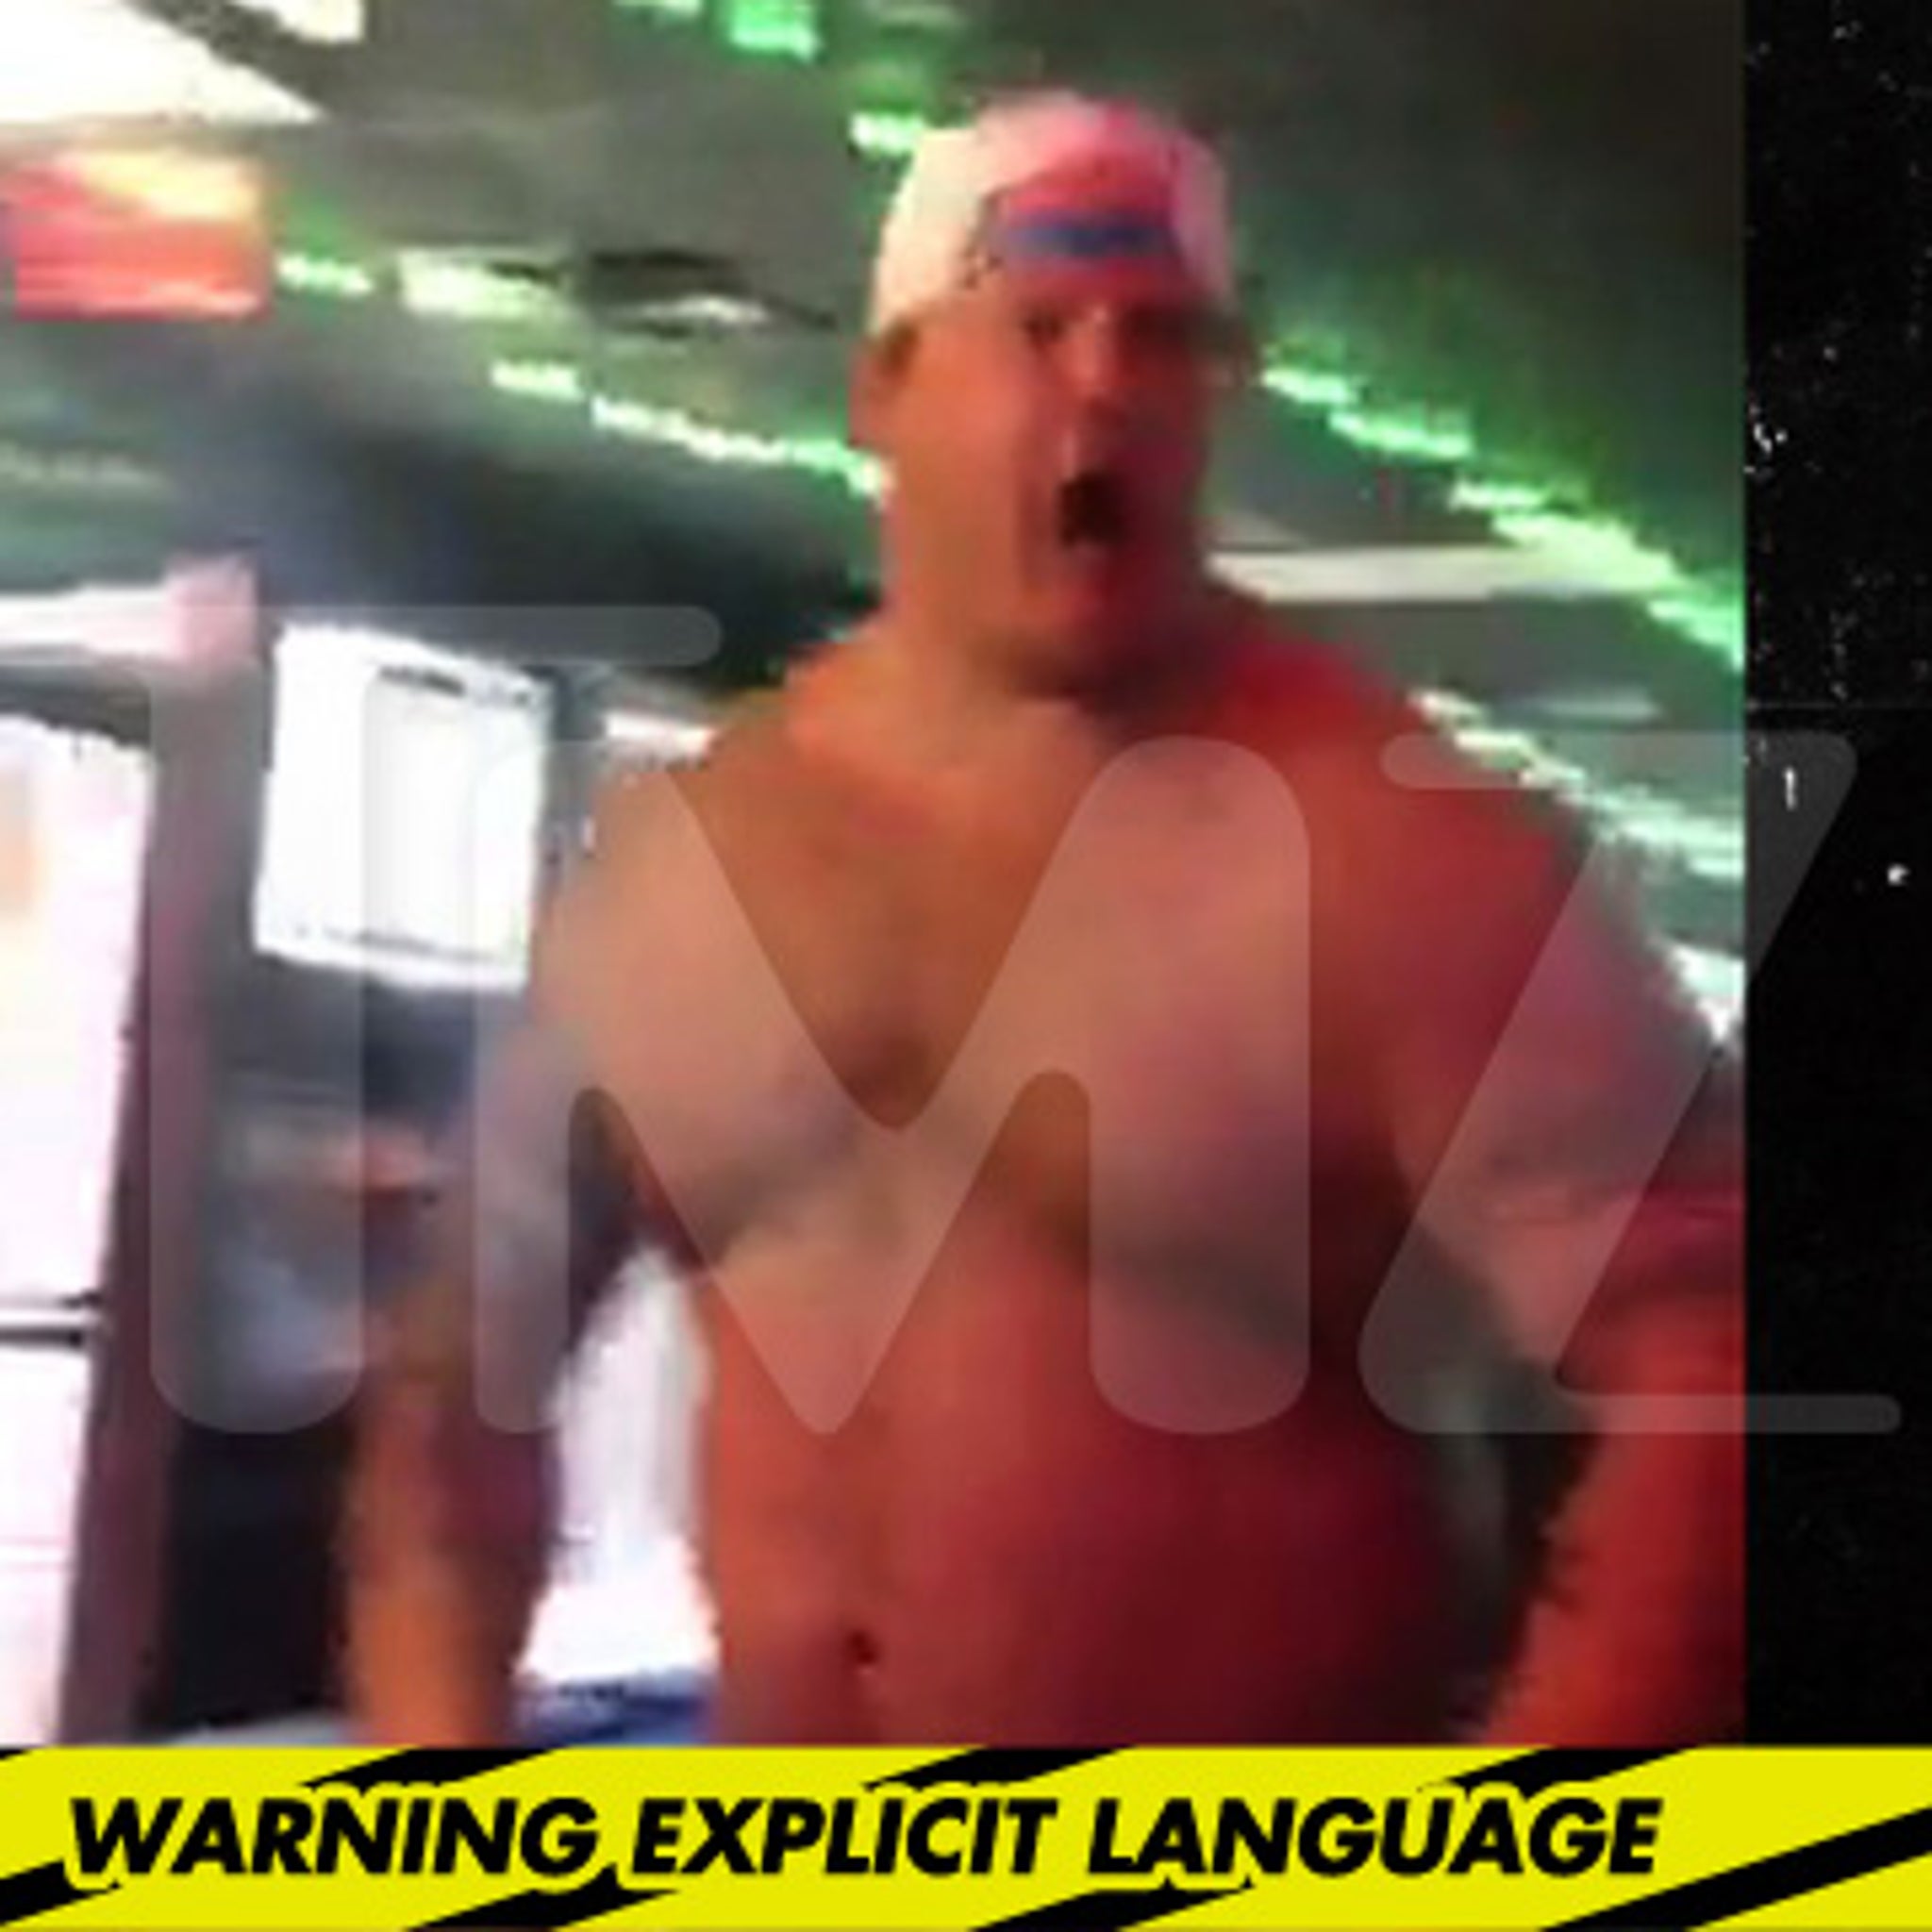 Richie Incognito -- DROPS N-BOMB ON VIDEO  in Crazy Bar Rage